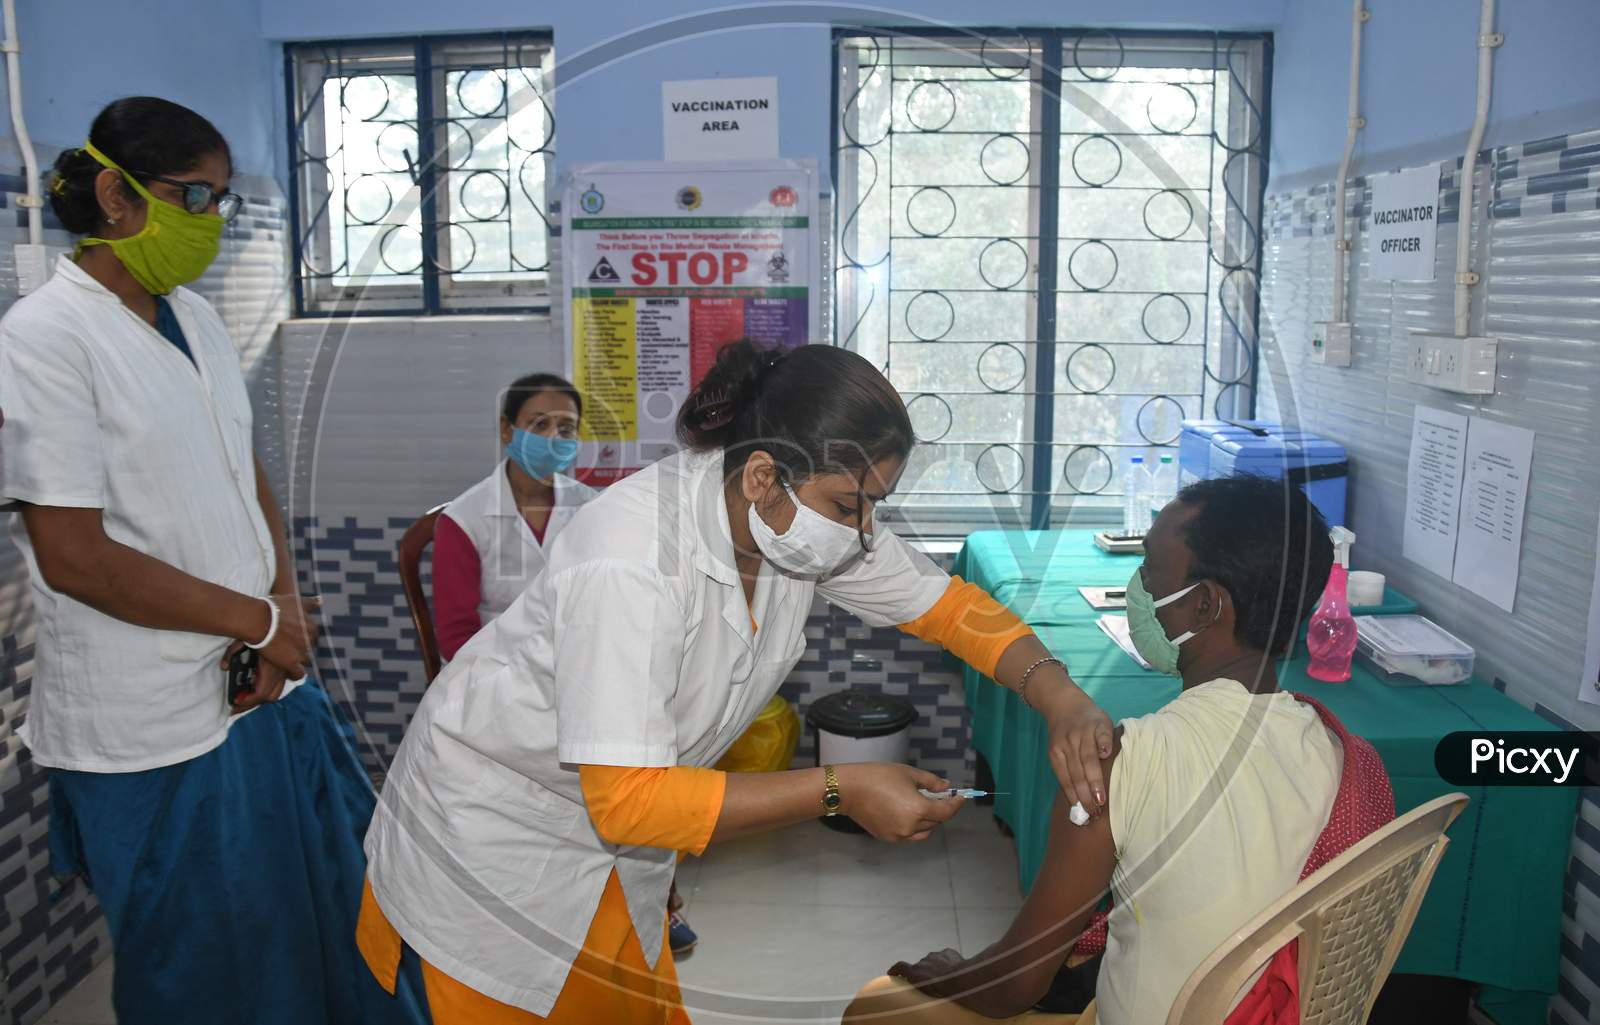 COVID-19 vaccination has been started in Purba Bardhaman district.